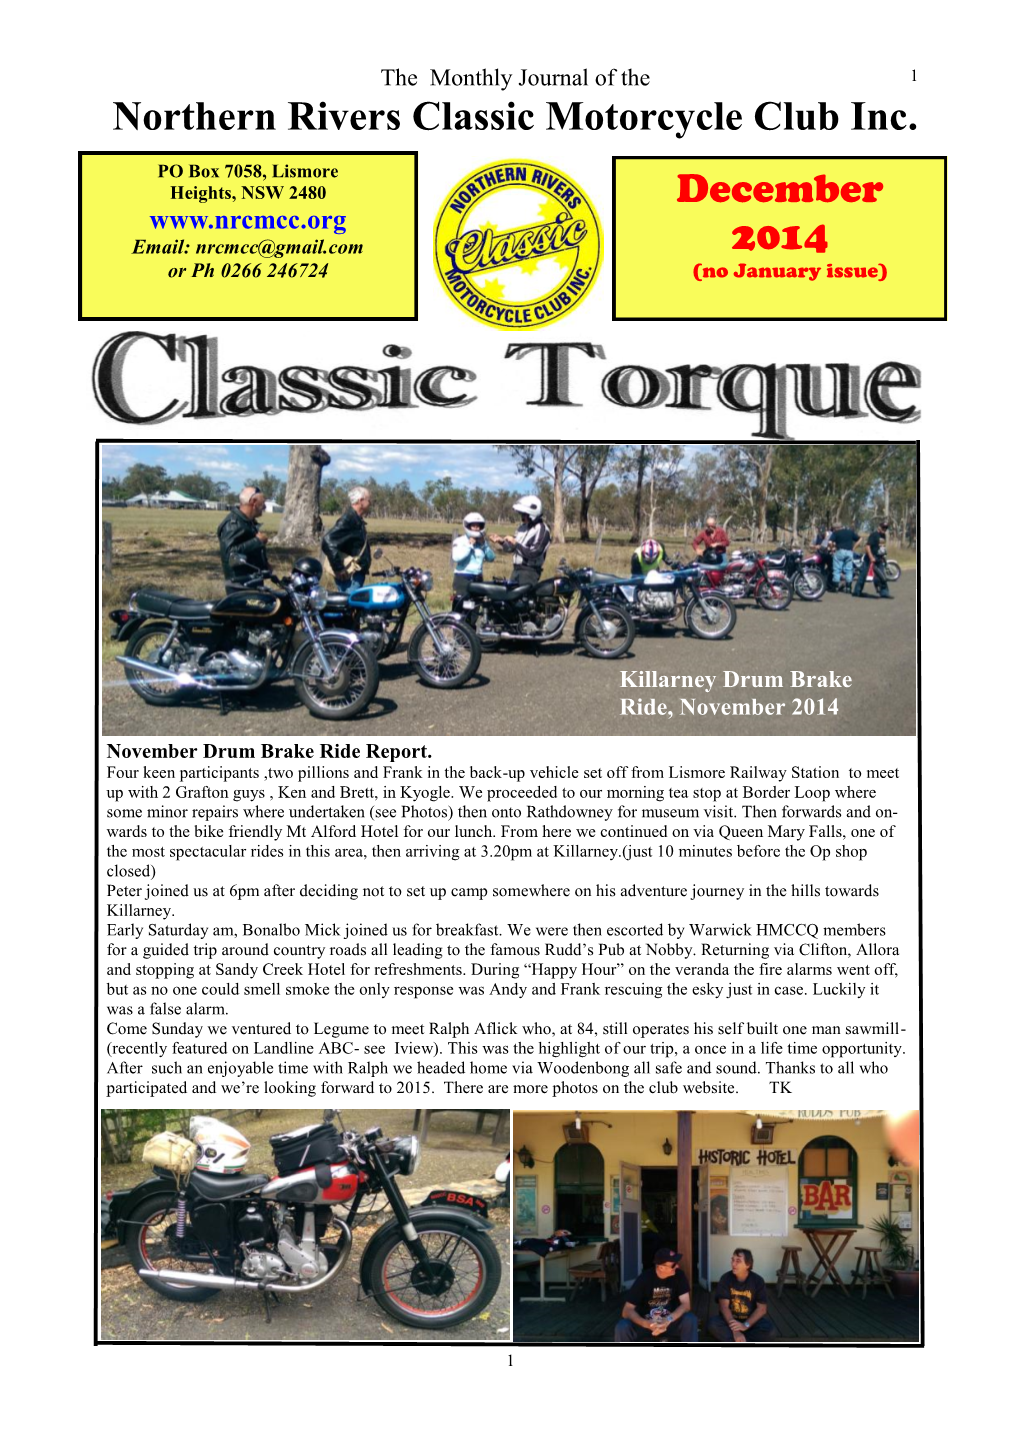 Northern Rivers Classic Motorcycle Club Inc. December 2014